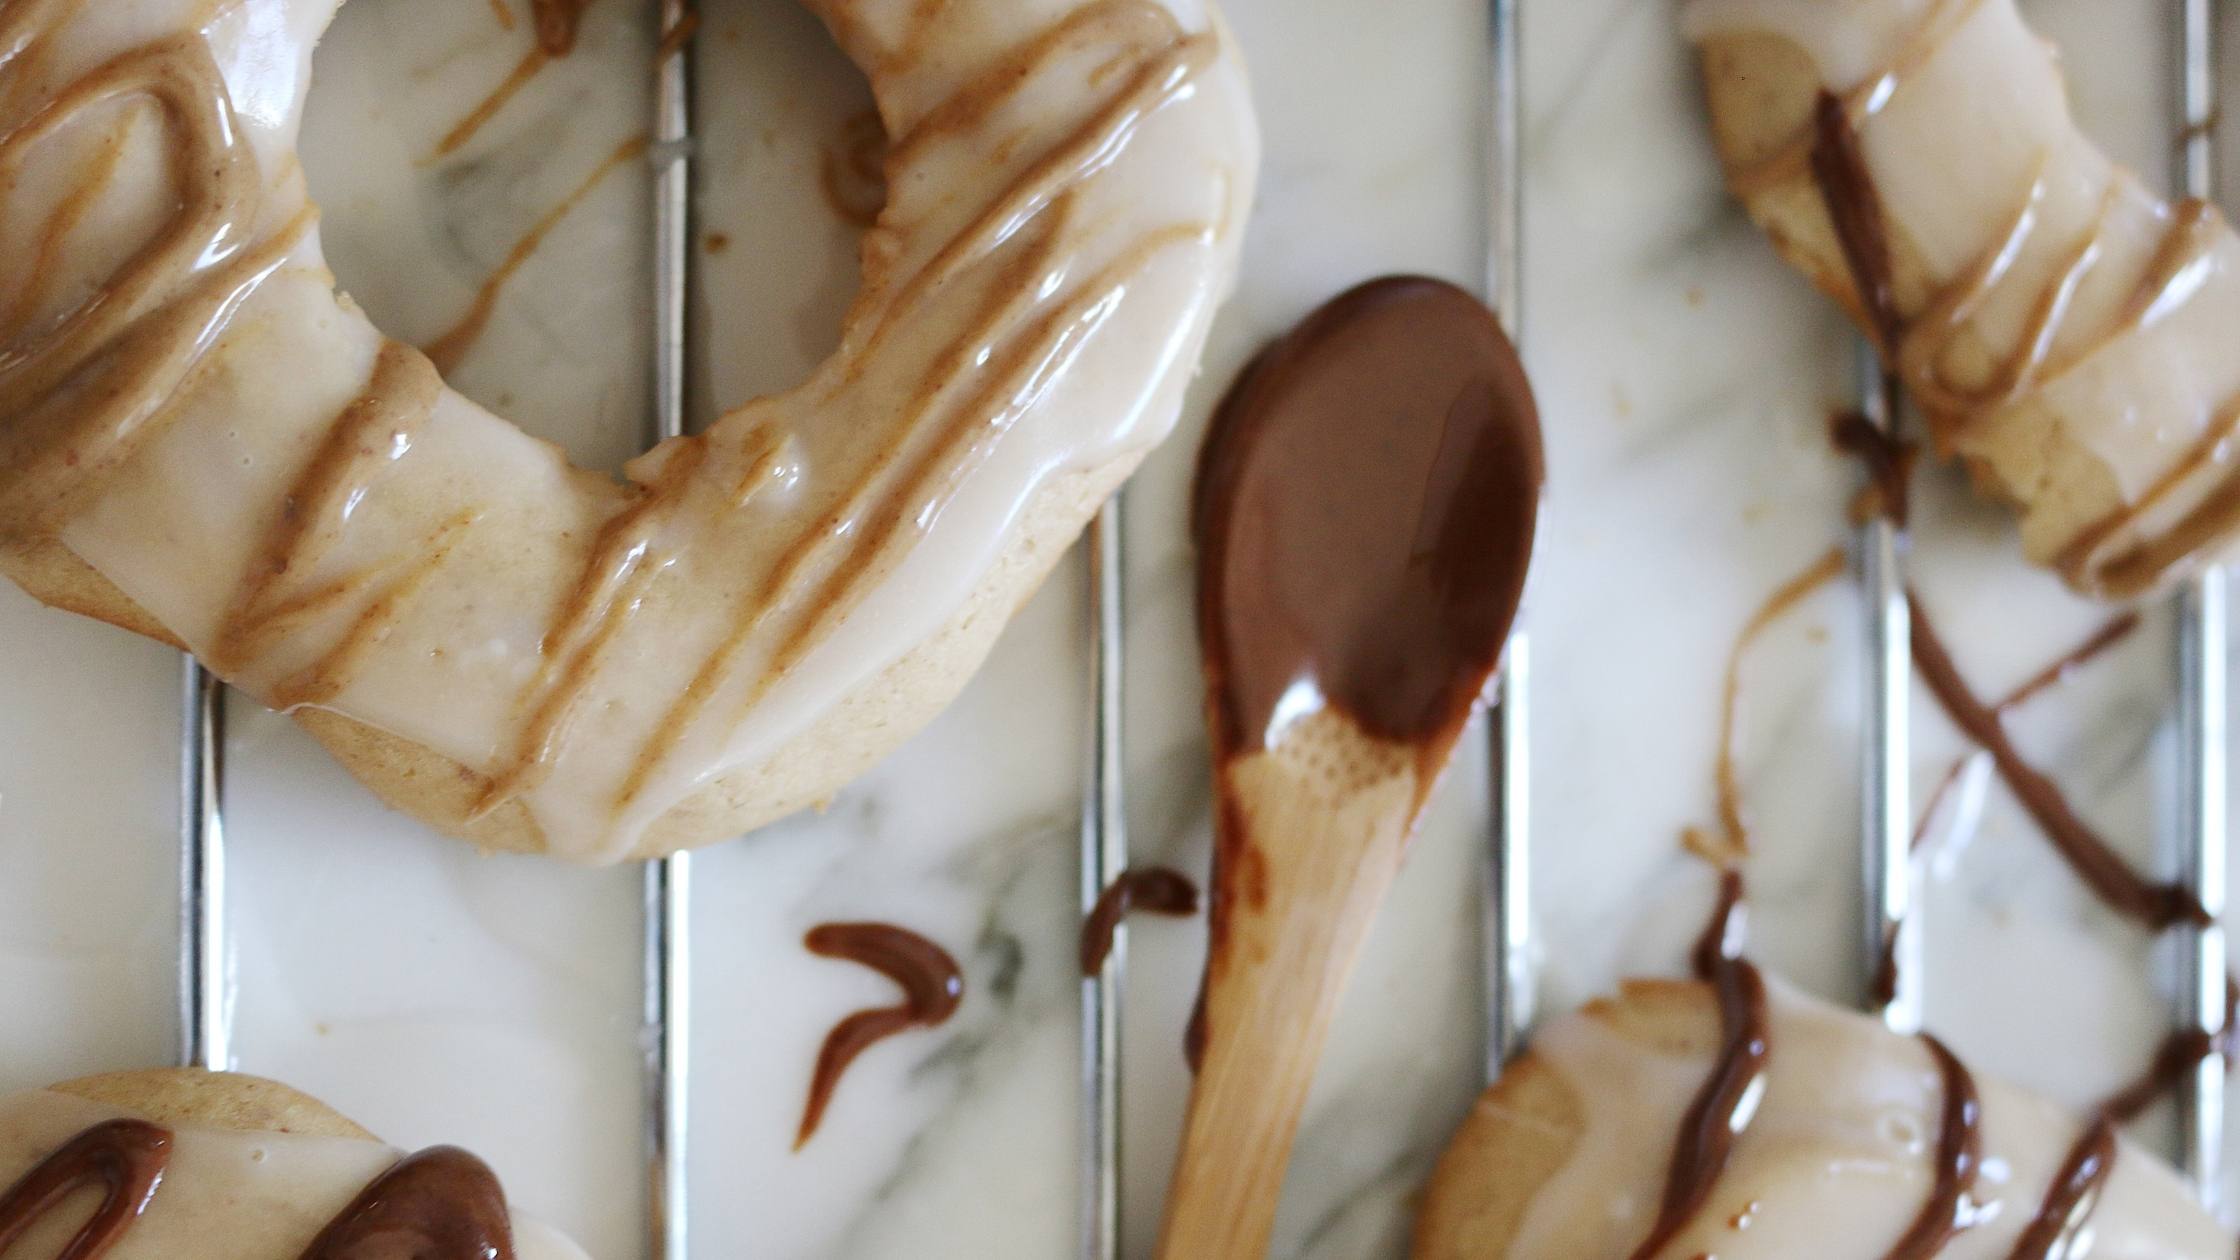 Homemade donuts with glaze and drizzled with nut butter